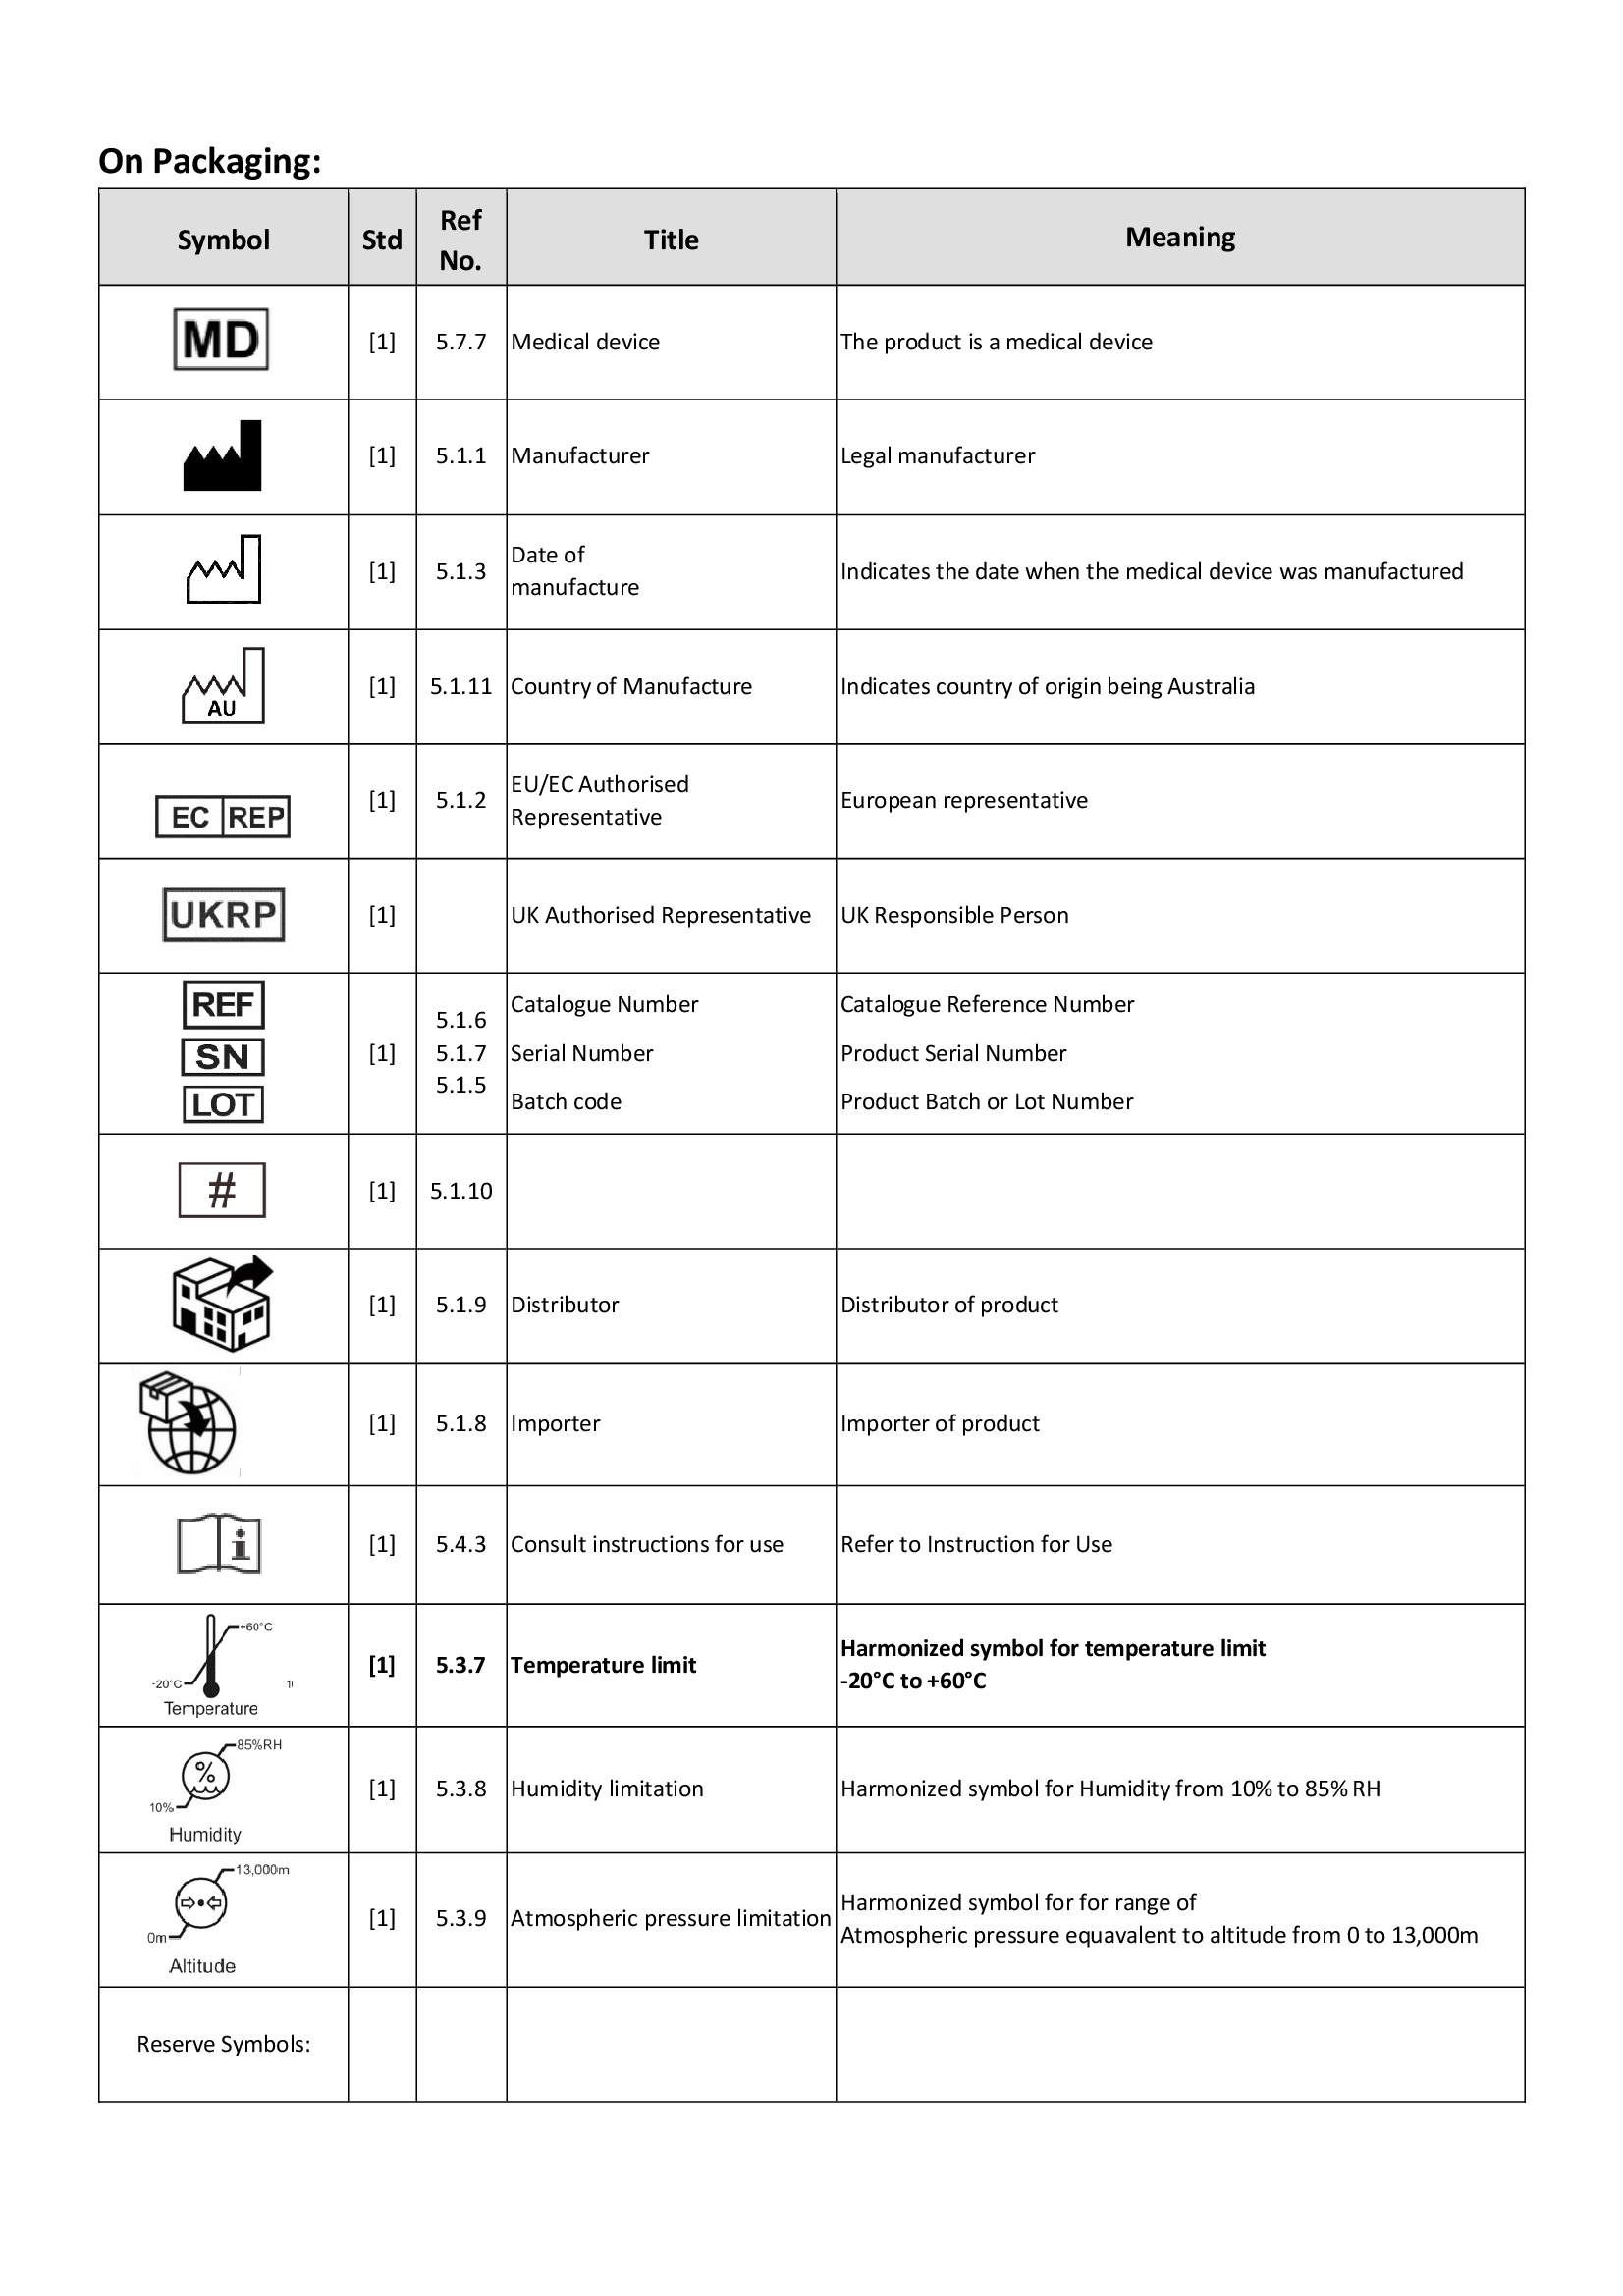 https://micropaceep.com/wp-content/uploads/2023/07/MicroPace-Glossary-of-Symbols0.1_00001.png